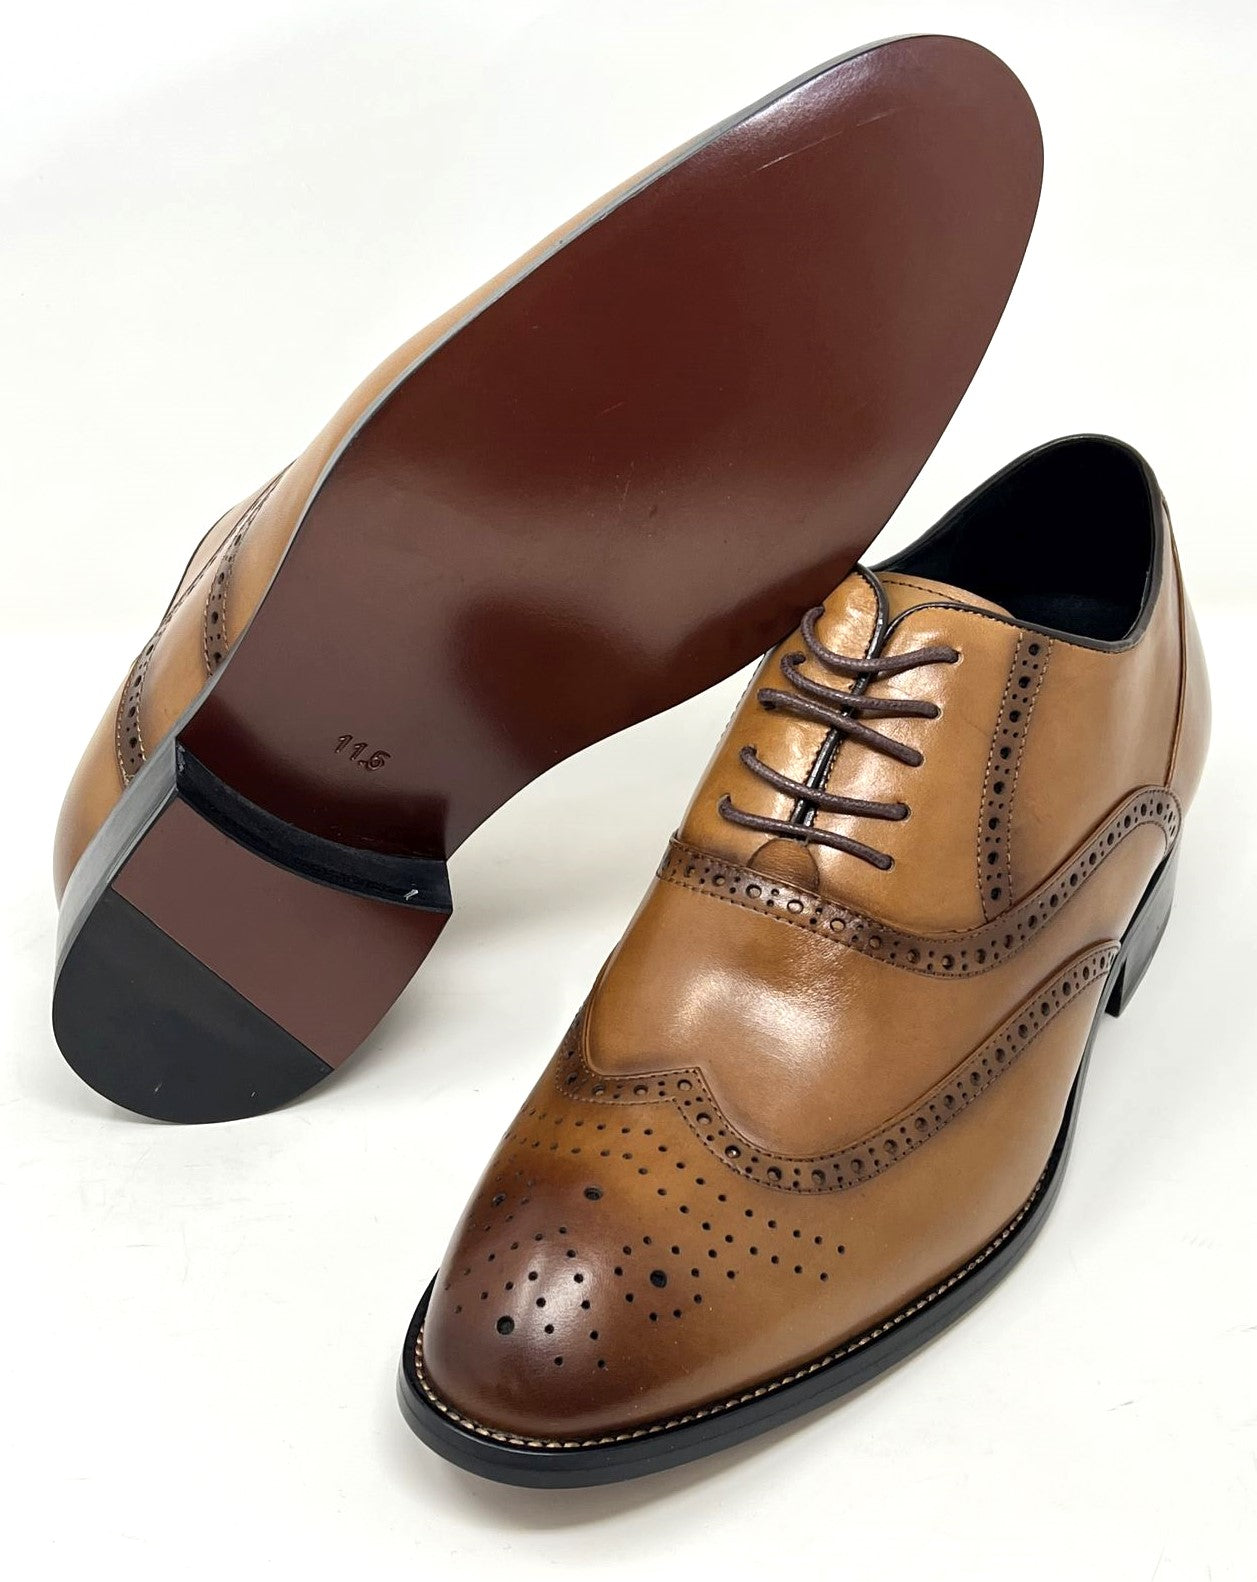 FSK0111 - 3 Inches Taller (Brown) - Size 11.5 Only